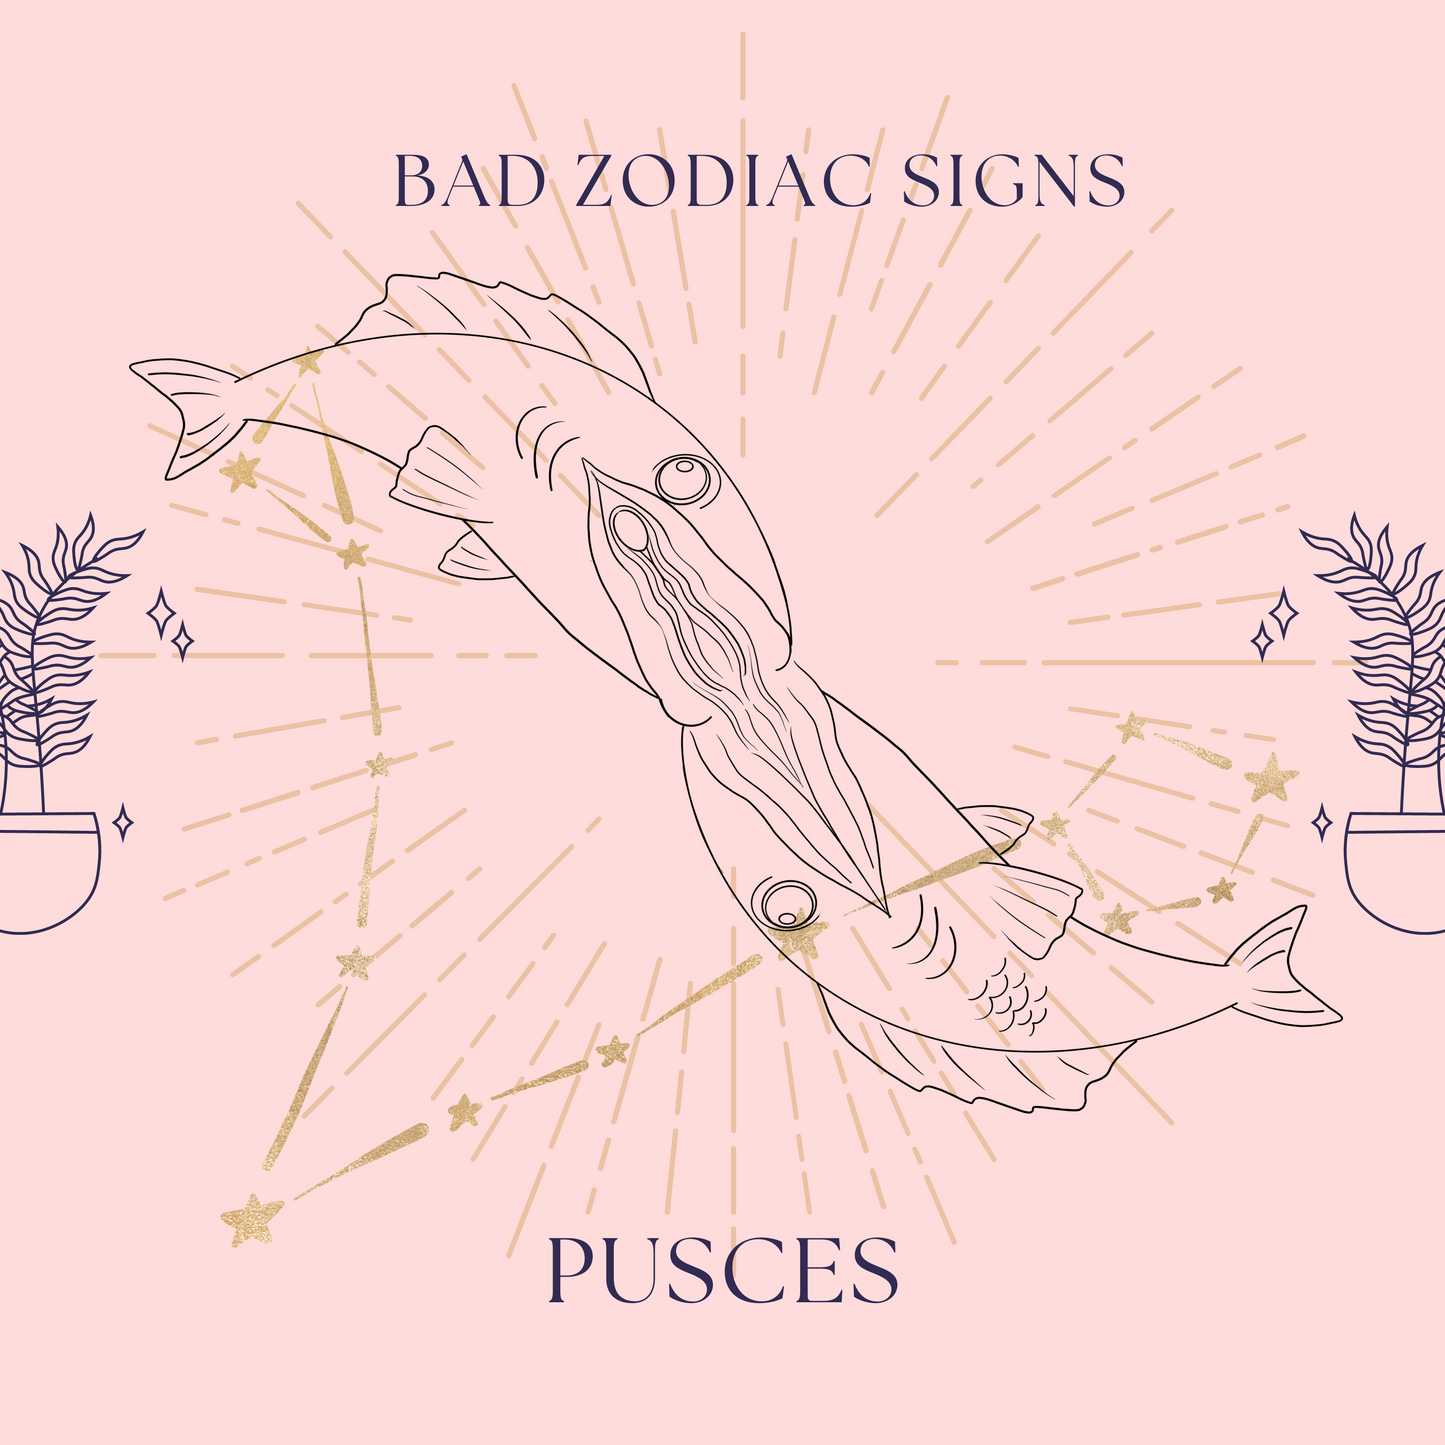 All 12 Bad Zodiac Signs Collectable Stickers